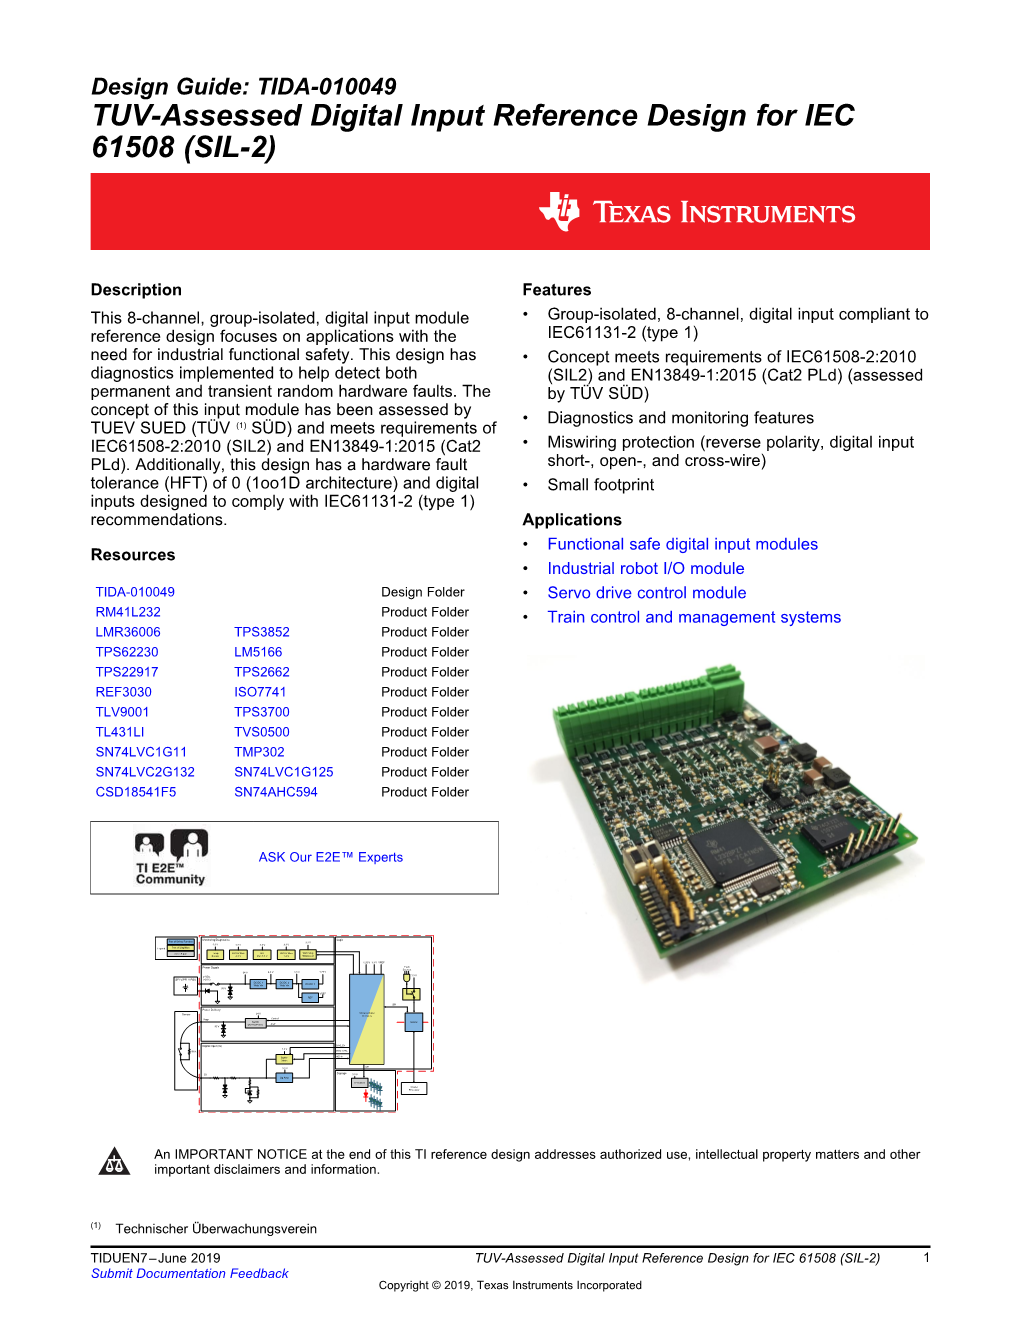 TUV-Assessed Digital Input Reference Design for IEC 61508 (SIL-2)